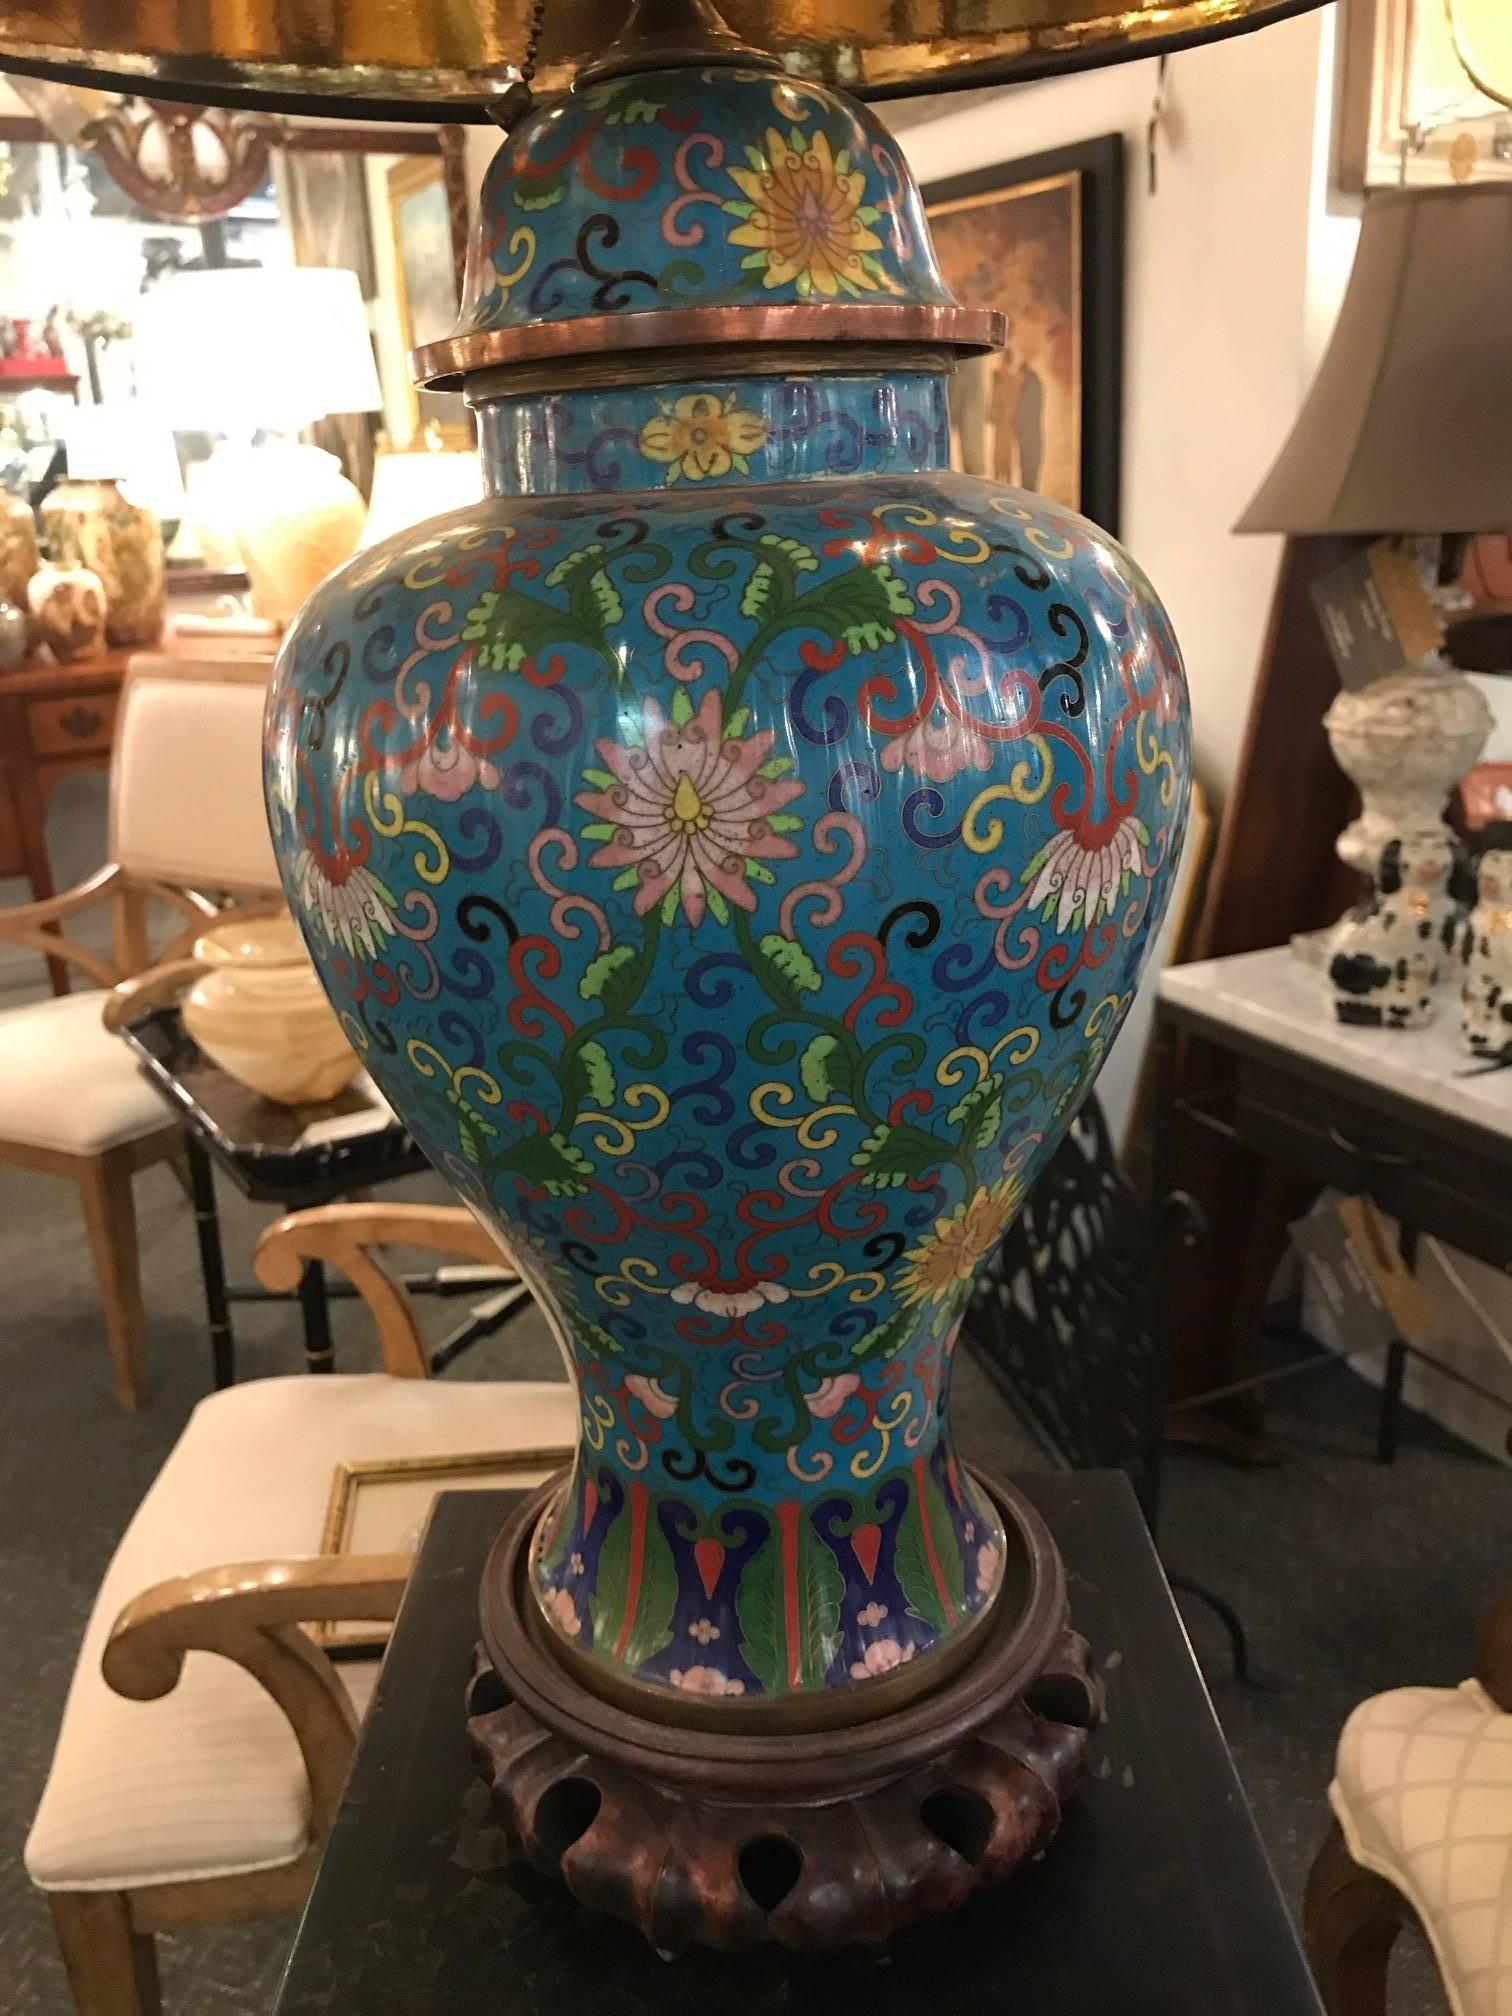 Late 19th century Chinese cloisonne covered urn now as a lamp. Celeste blue background with intricate scrolling and floral decoration all-over. The hand-carved rosewood base is from the same period. The shade is for photographic purposes only and